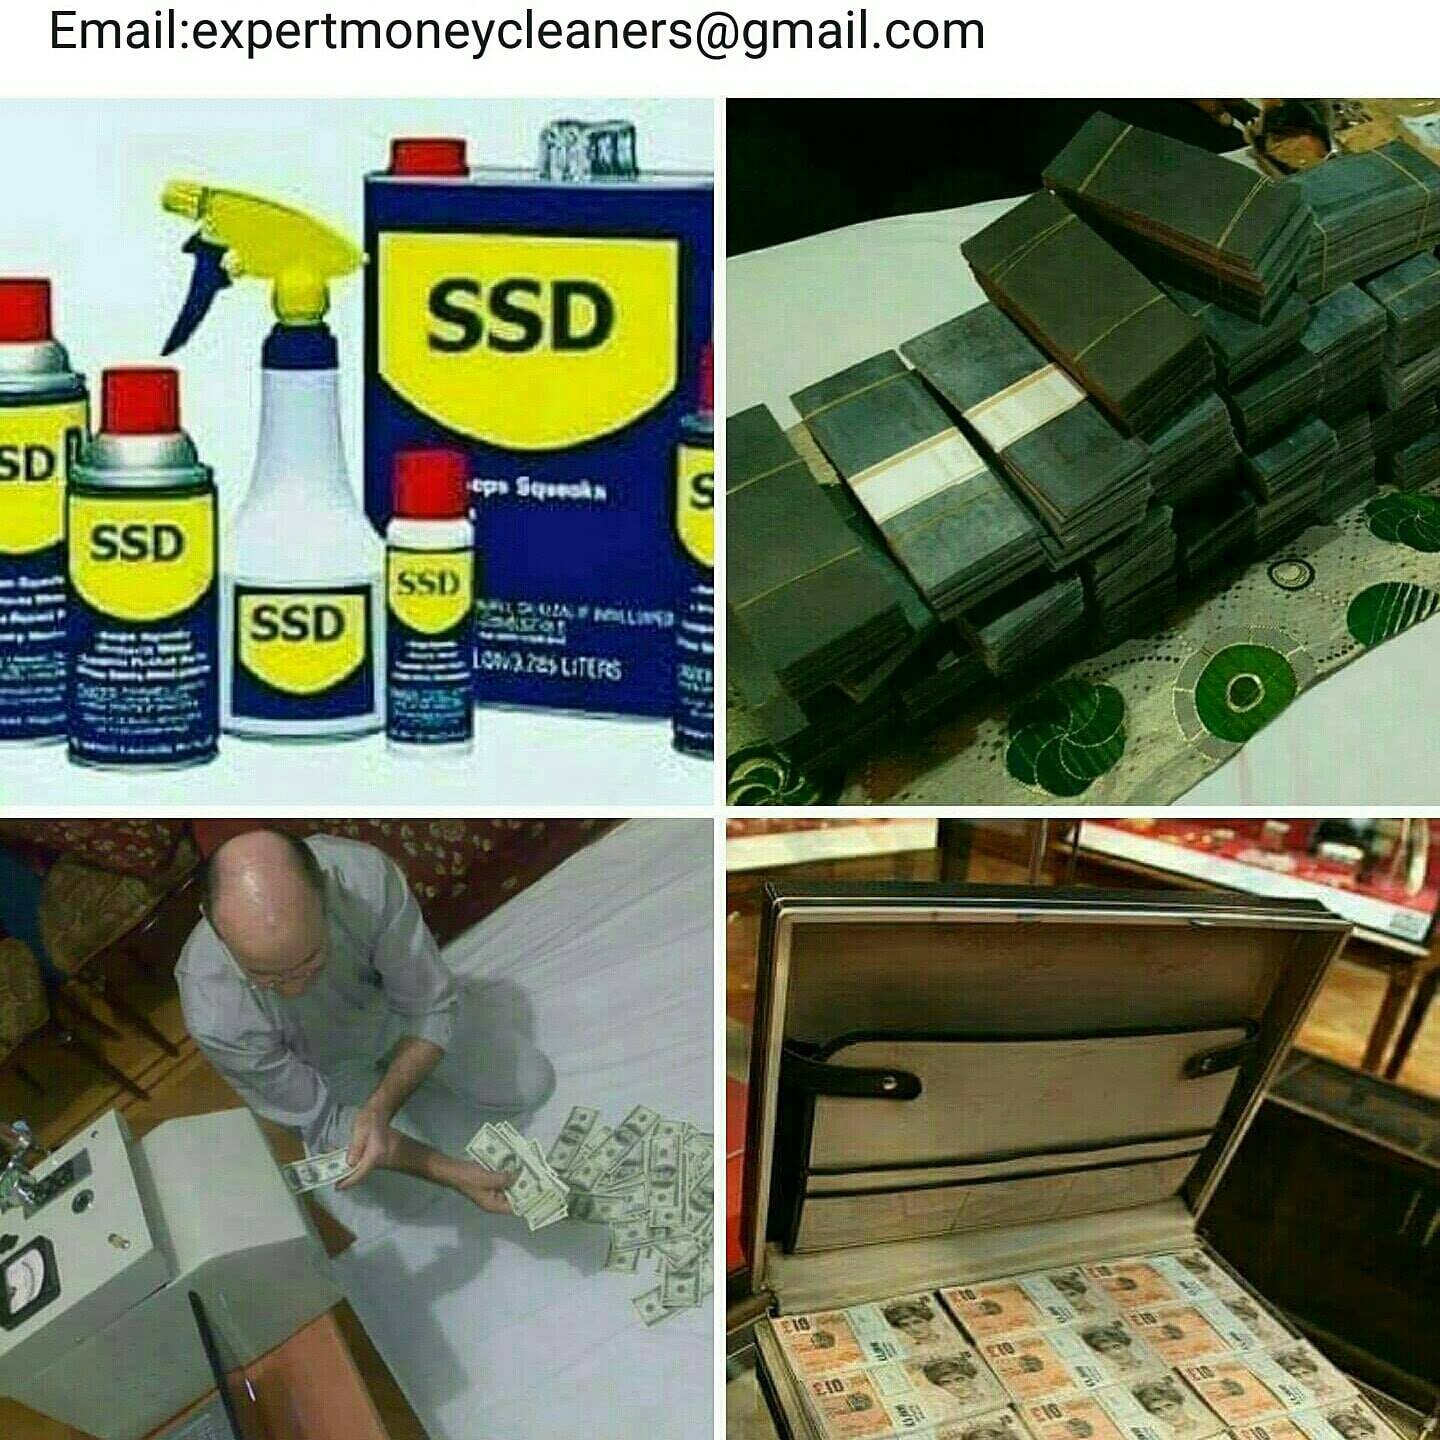 PAKISTAN AUTOMATIC MONEY/NOTES CHEMICAL CLEANING SOLUTION+27839746943 FOR SALE IN ISLAMABAD, Islamabad, Pakistan